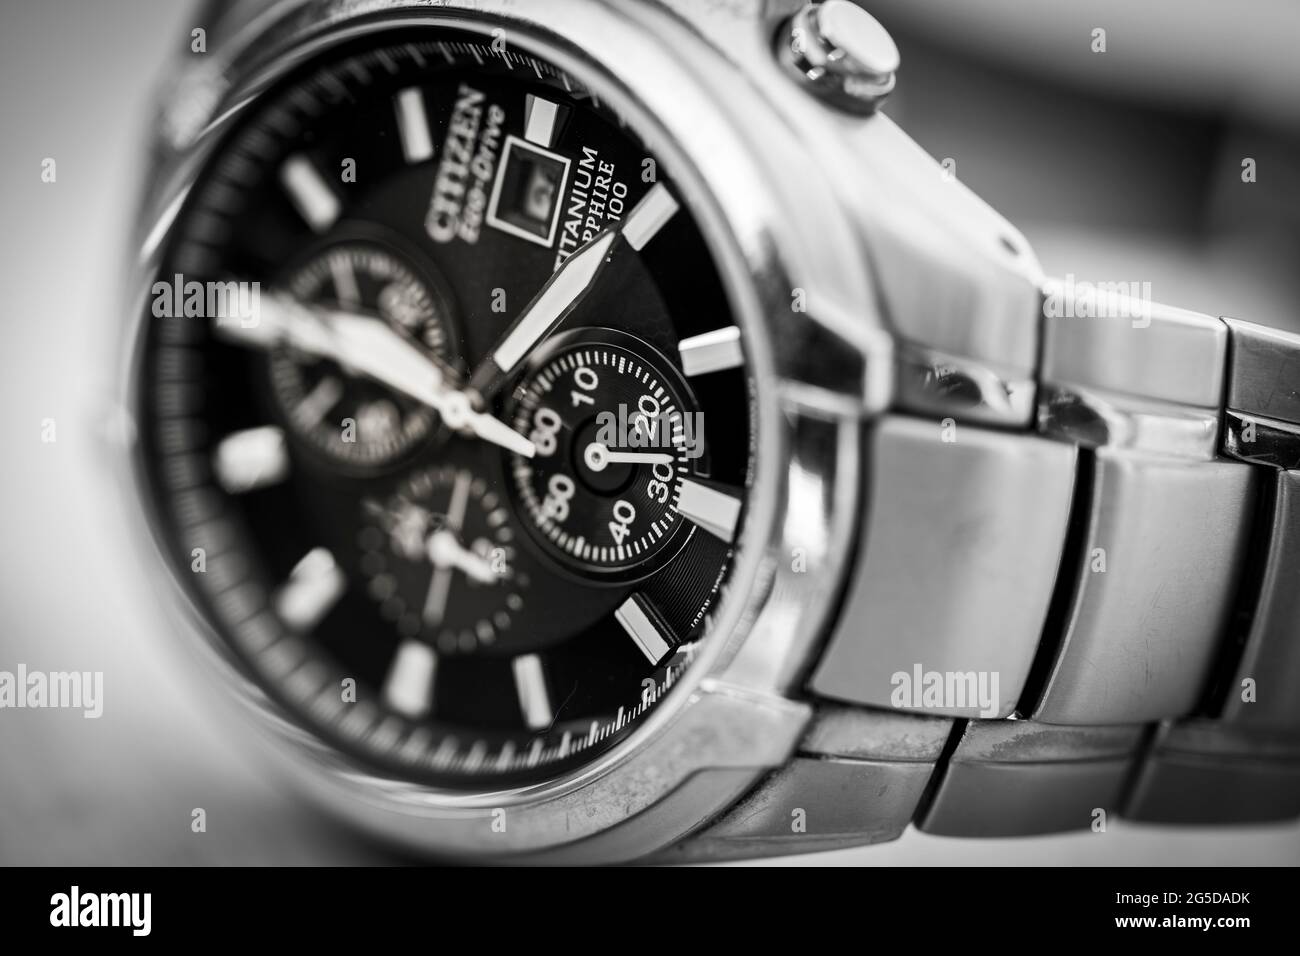 Monochrome black and white closeup image of a Citizen Eco Drive solar powered titanium metal man's wristwatch face showing clock hands and the strap Stock Photo